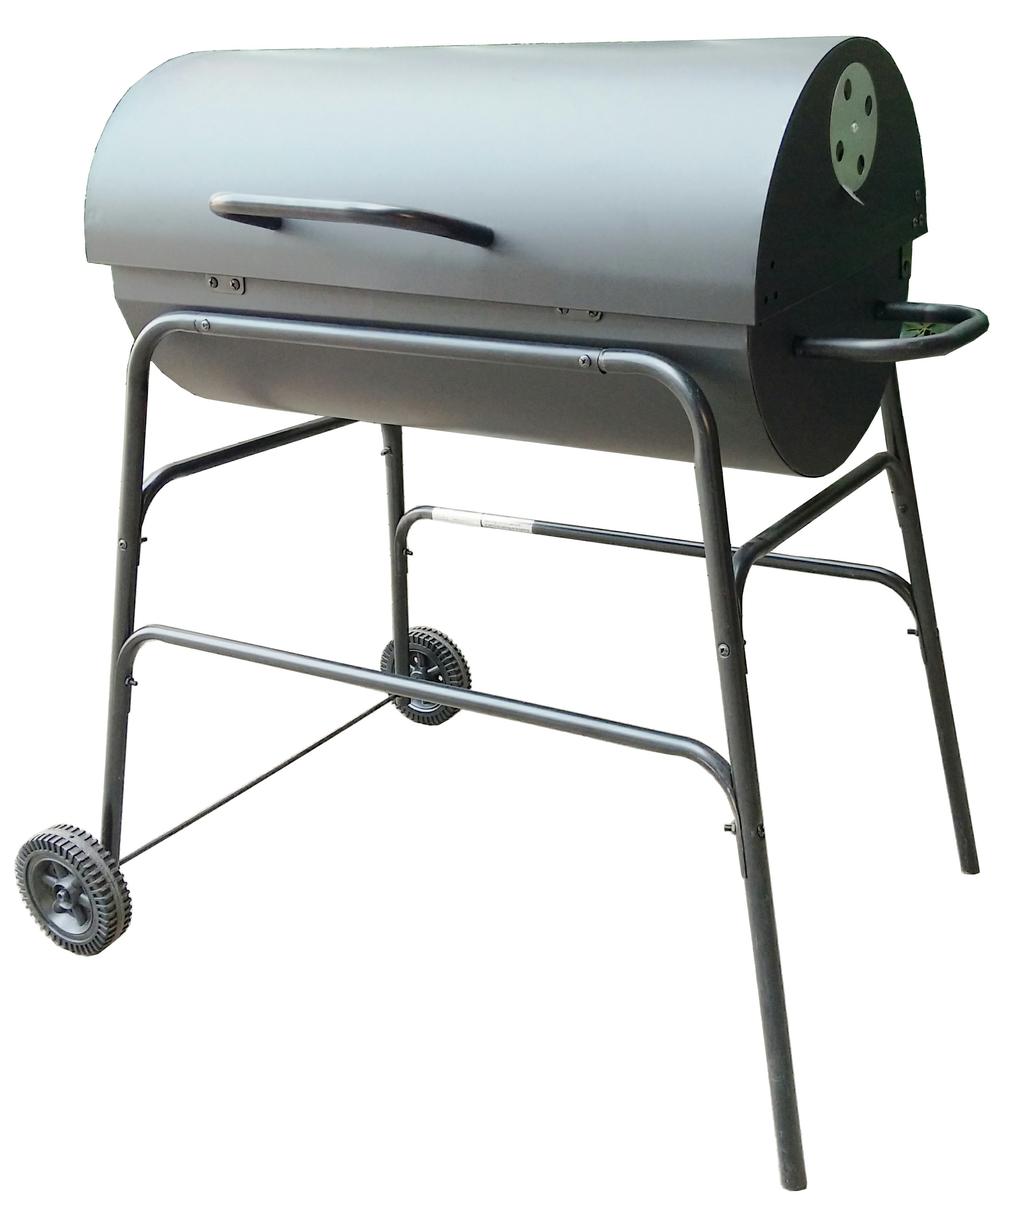 ASSEMBLY AND USER INSTRUCTIONS STEEL DURM BBQ Model DRUMBBQ WARNING - Observe these instructions to avoid personal injury and damage to property NEVER leave a burning